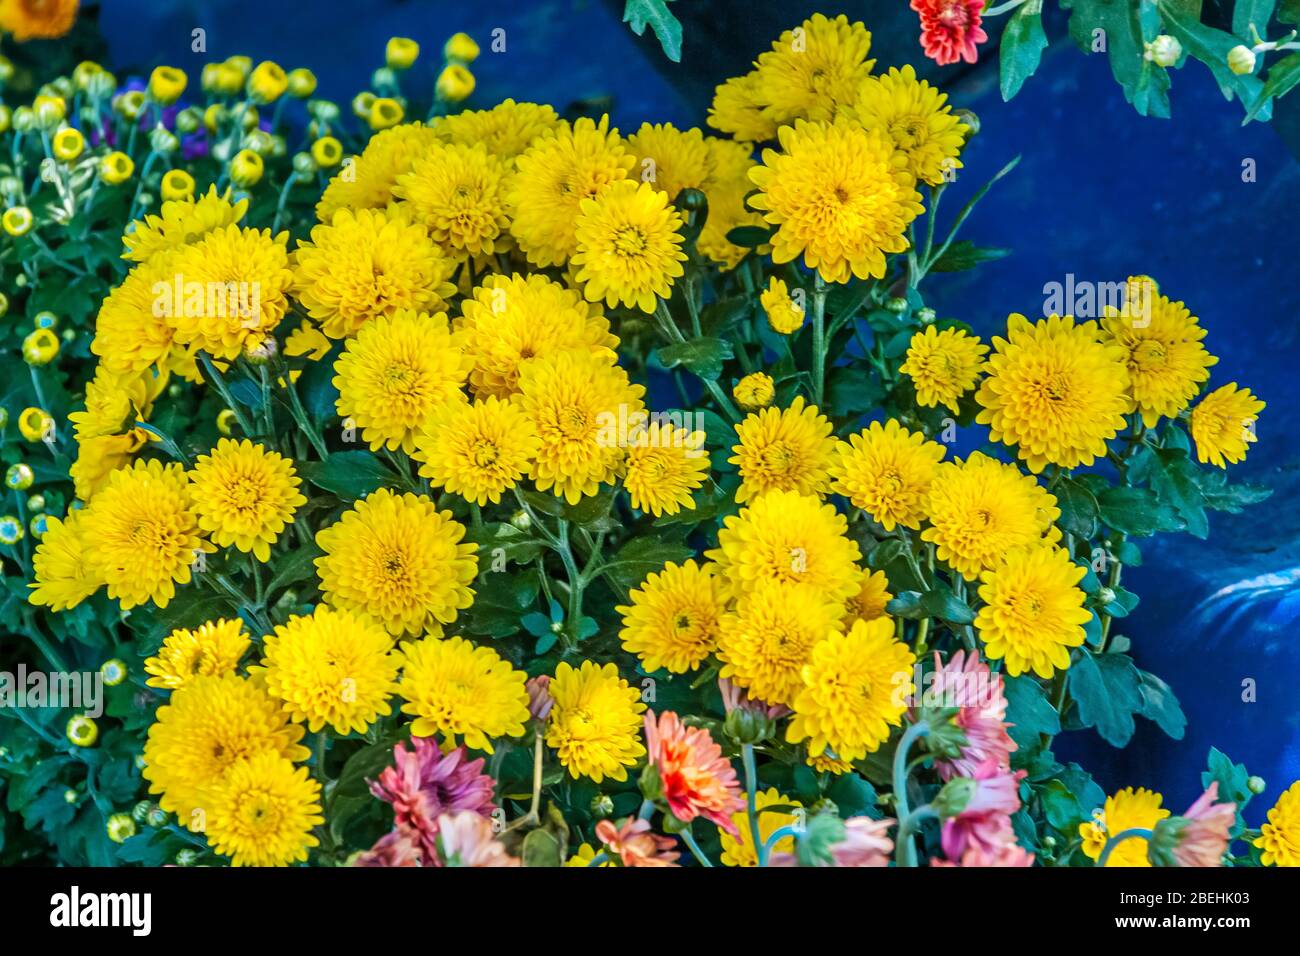 Yellow Chrysanthemums (Chrysanthemum, family Asteraceae). They are native to Asia and northeastern Europe. Stock Photo